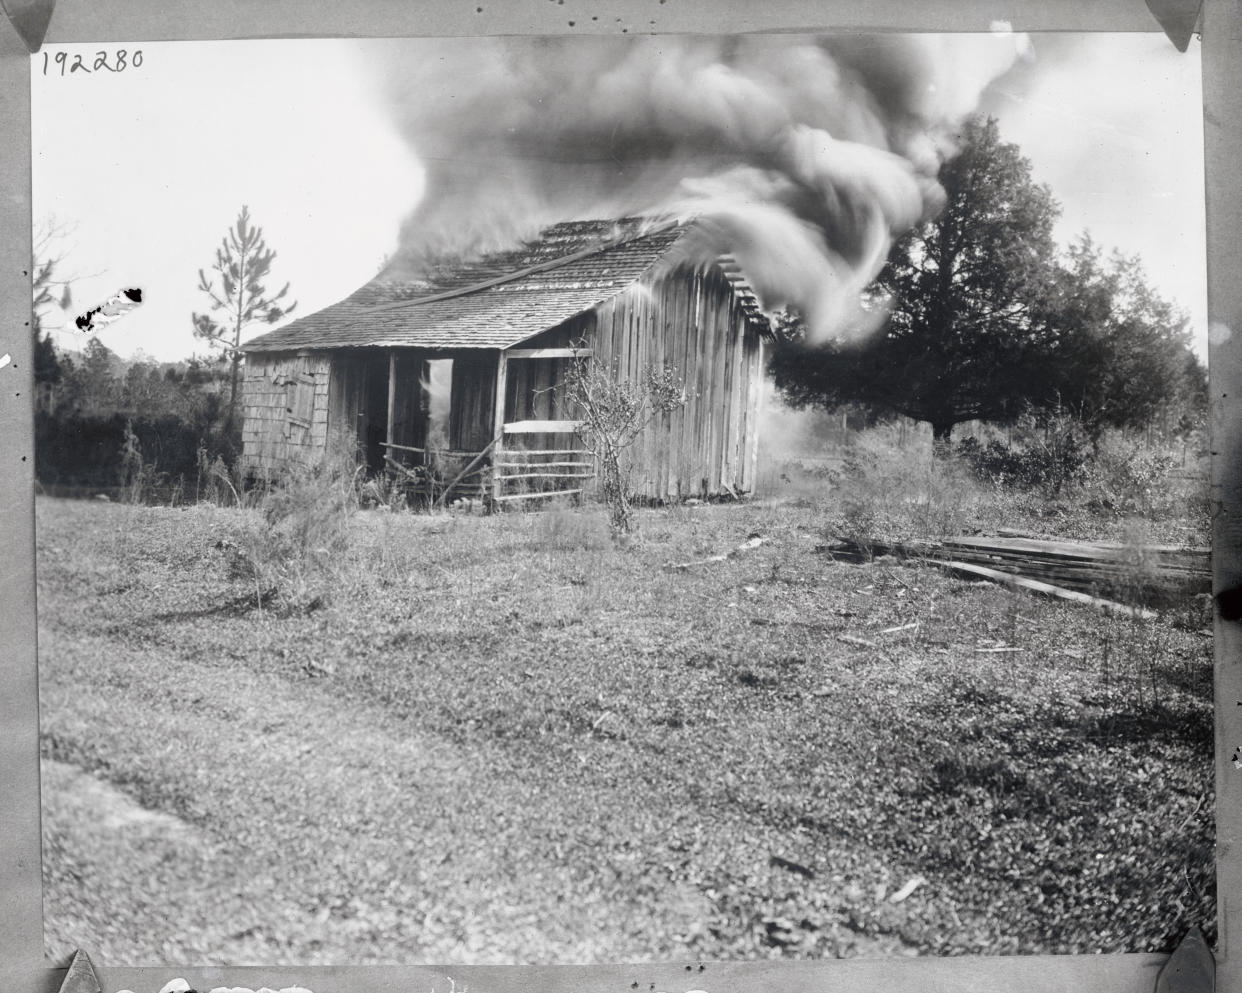 A black-and-white photo of a small house that is on fire.